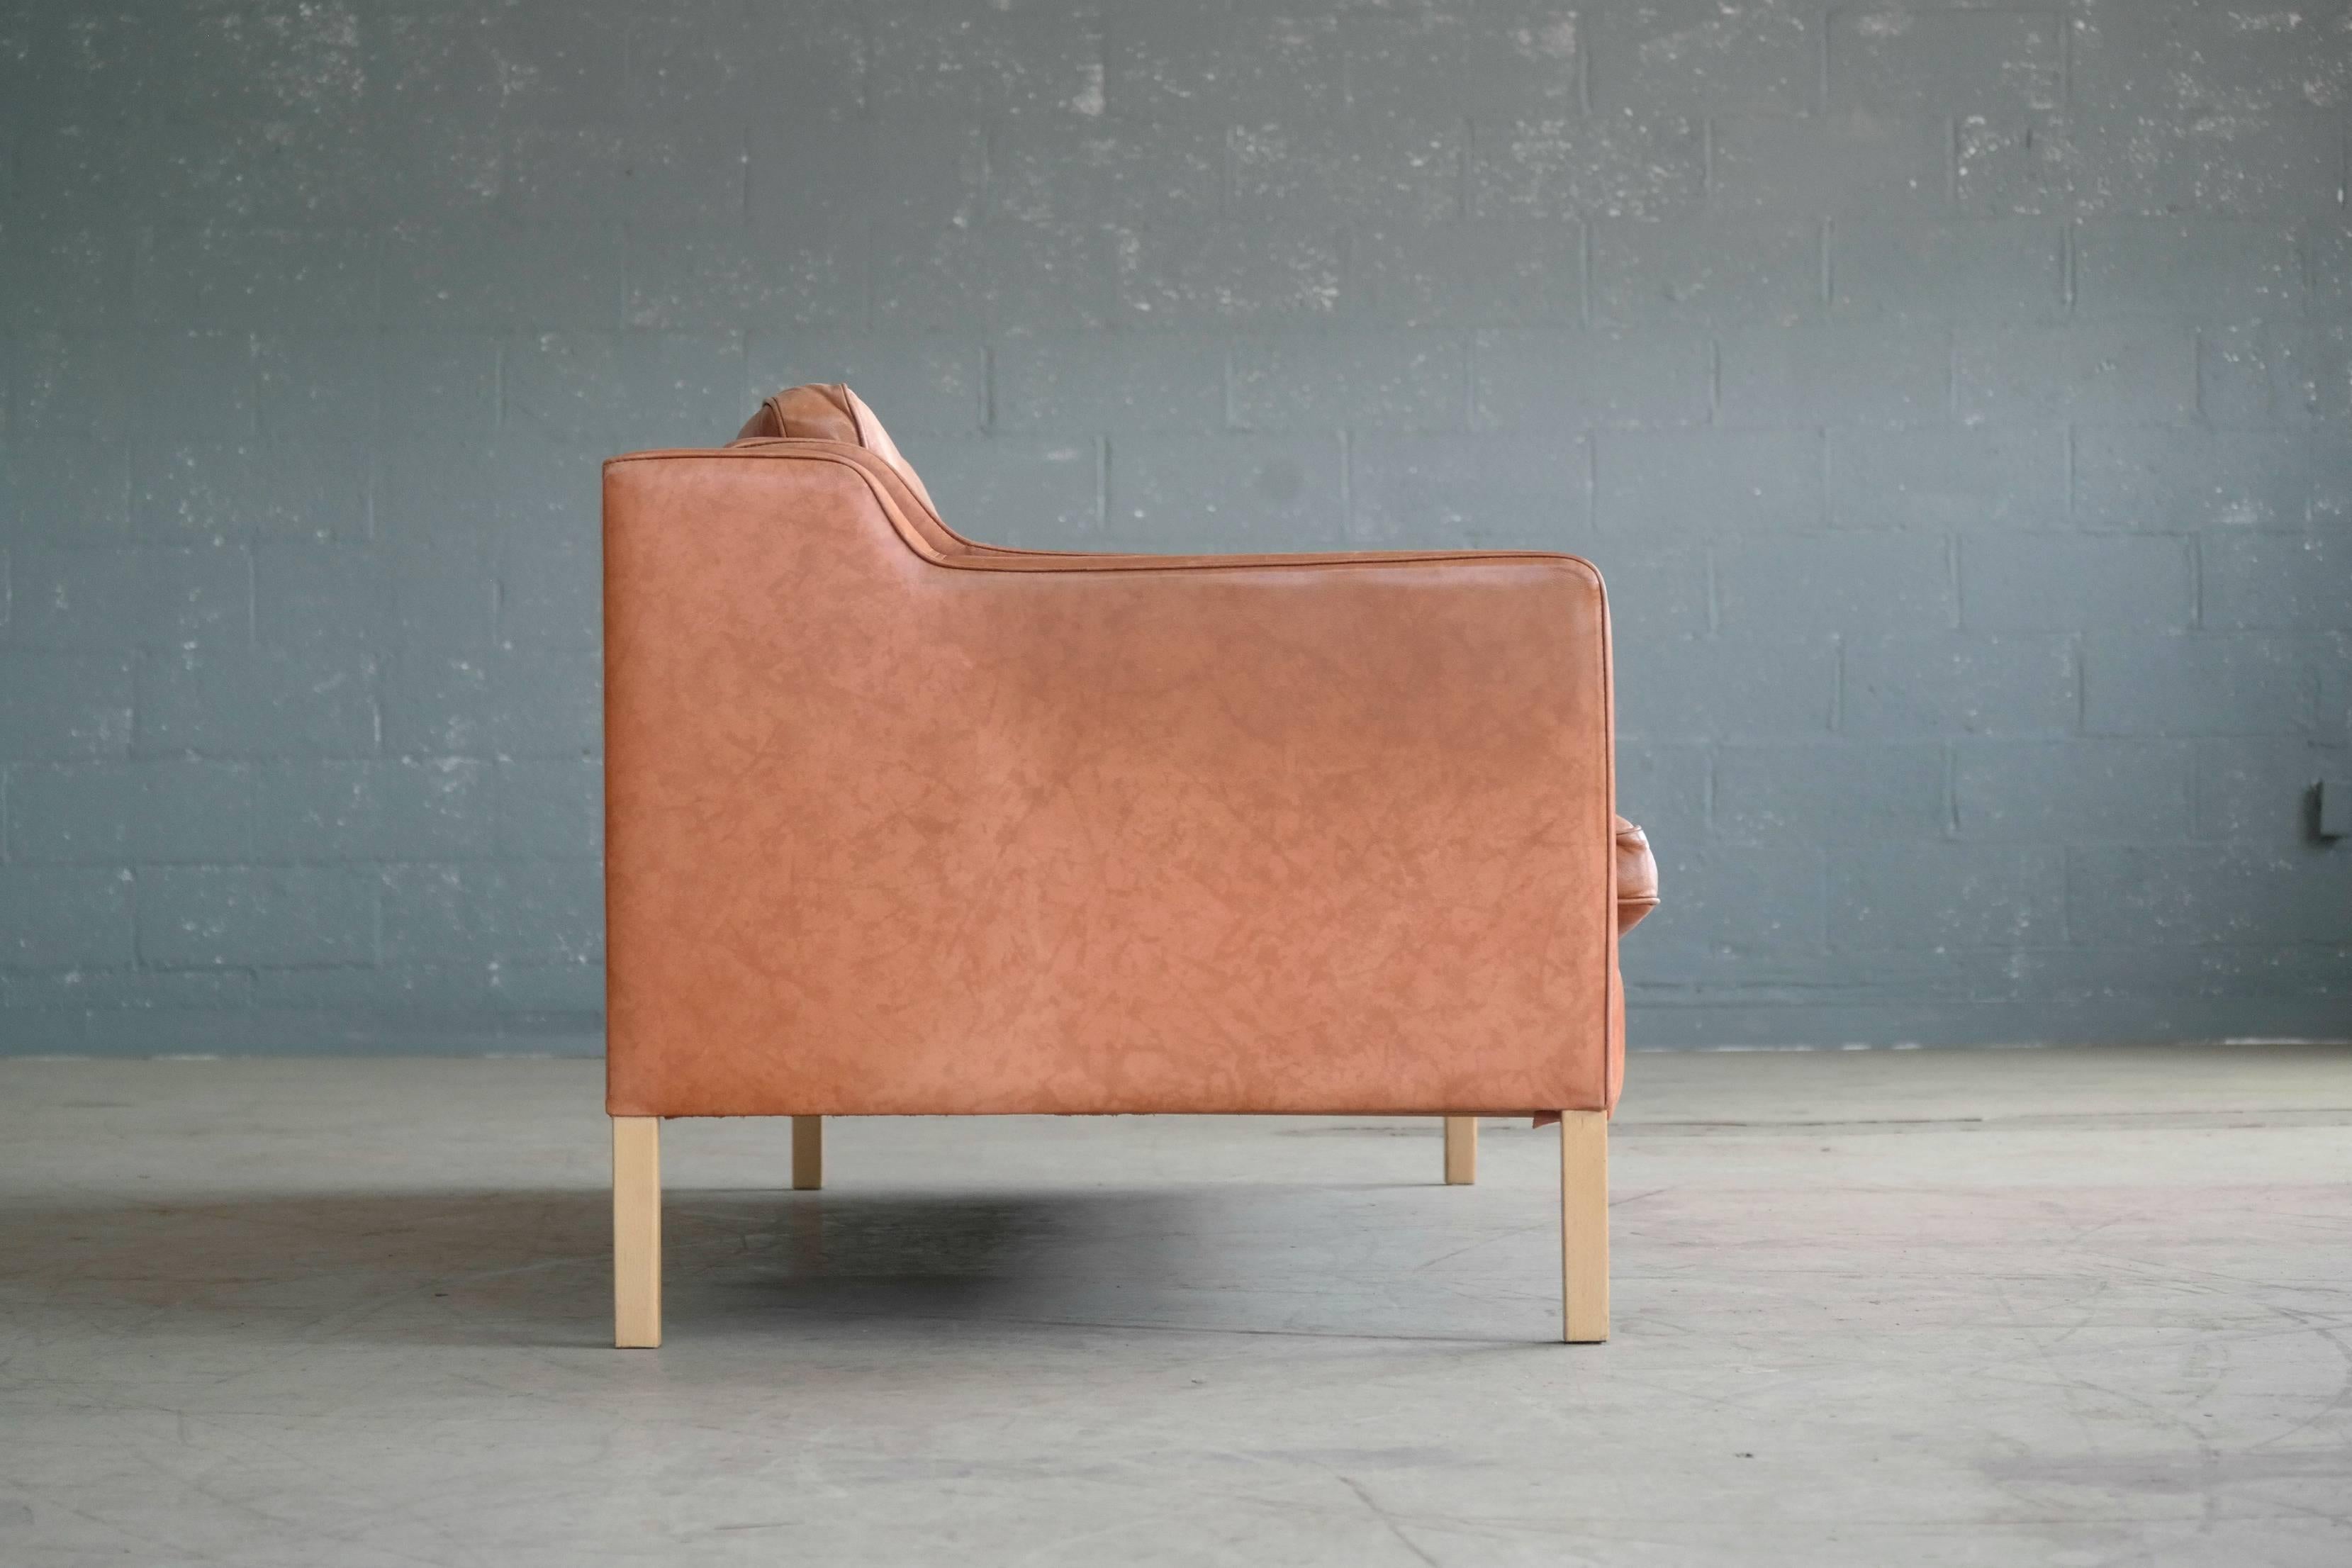 Mid-20th Century Børge Mogensen Style Sofa Model 2213 in Light Cognac Leather by Stouby Mobler